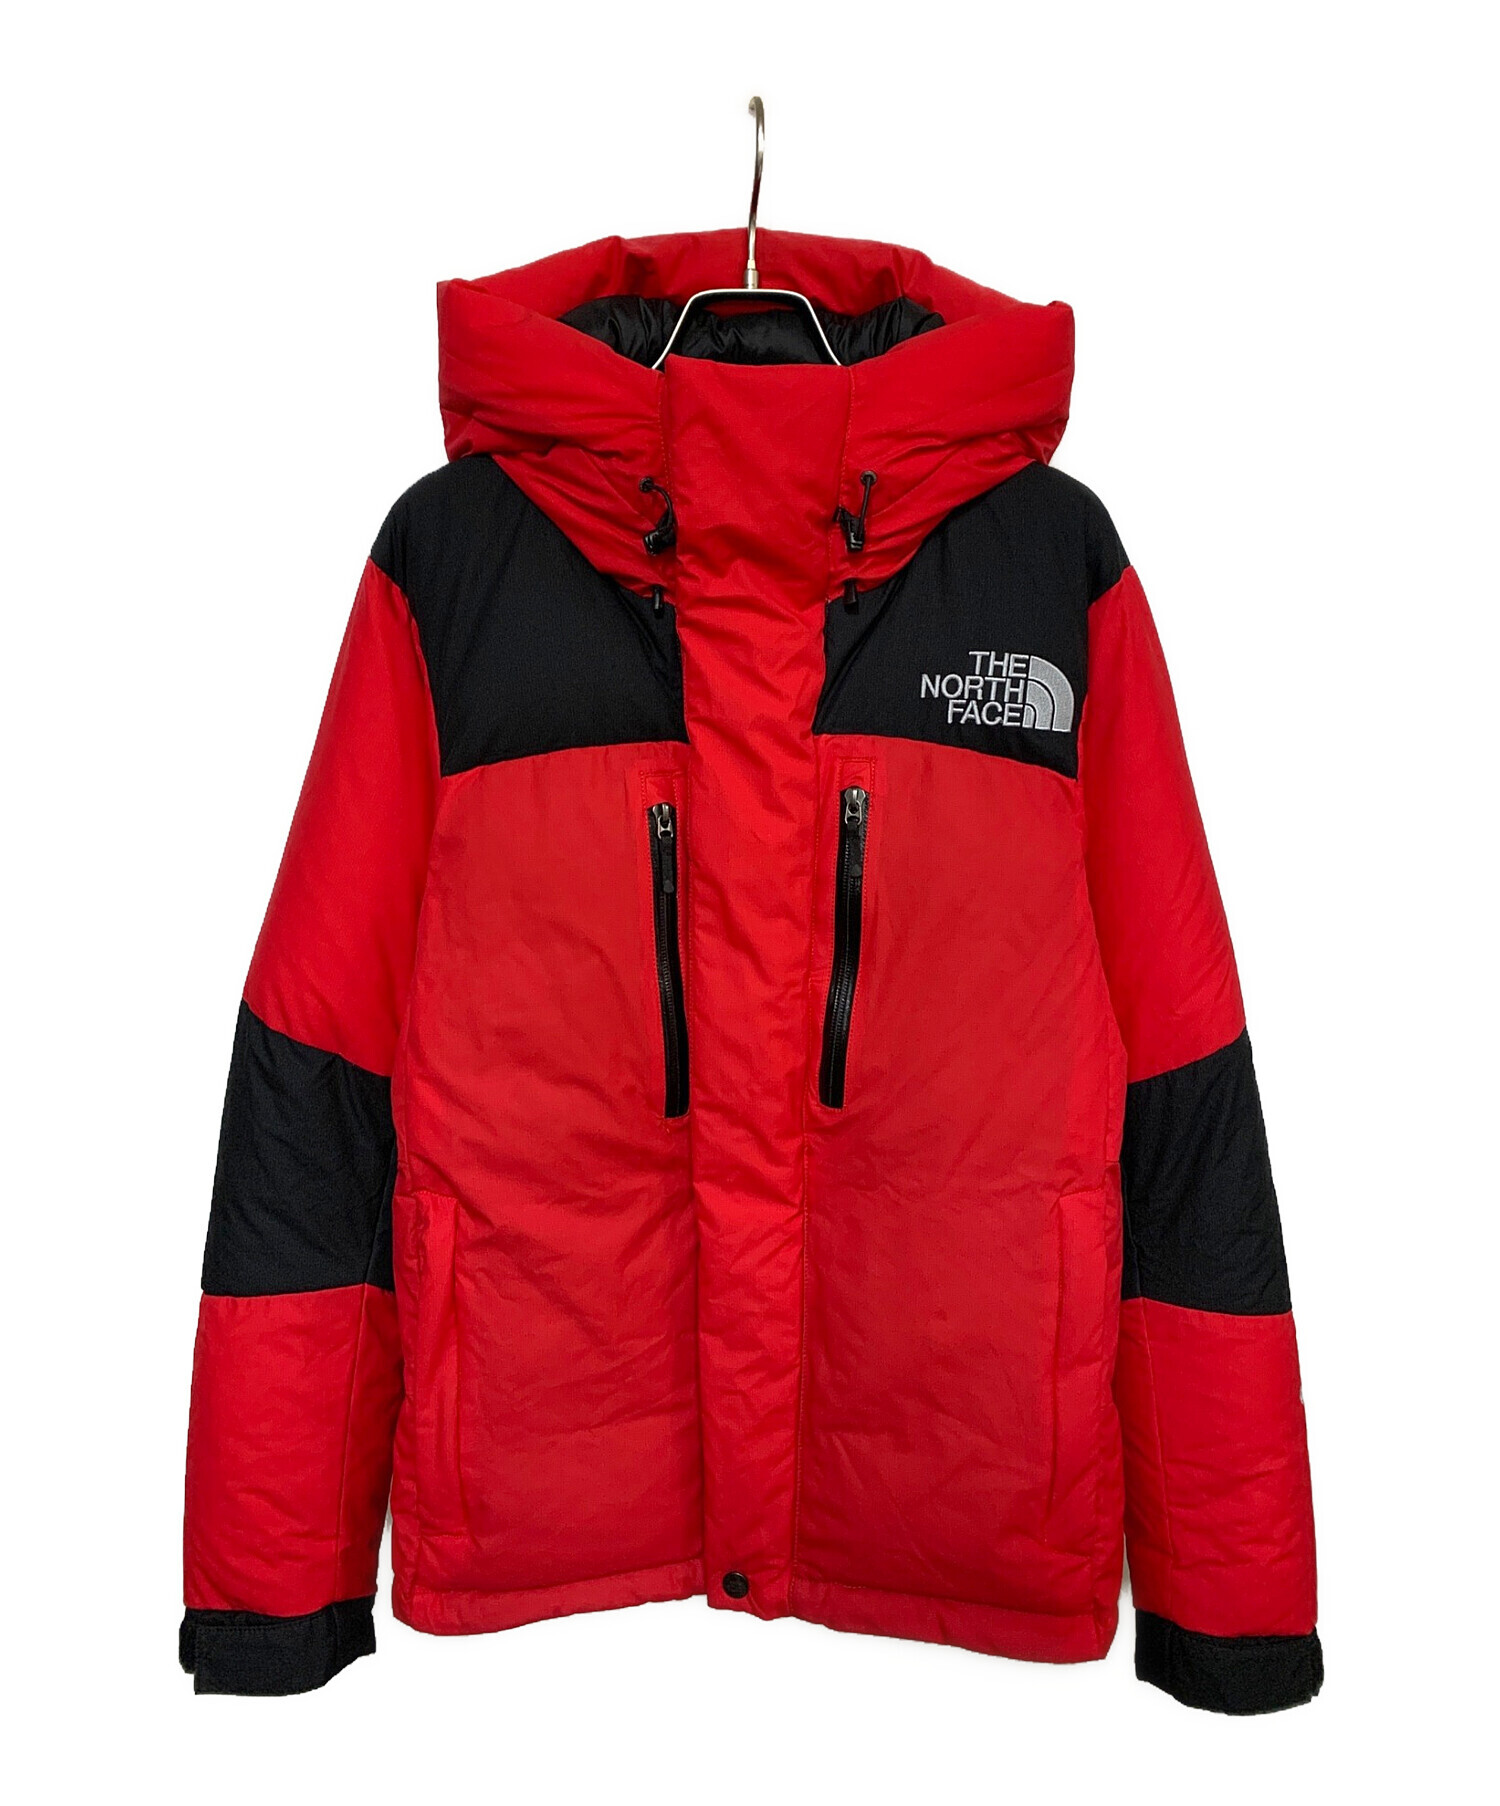 Mサイズ バルトロライトジャケット TR RED THE NORTH FACE